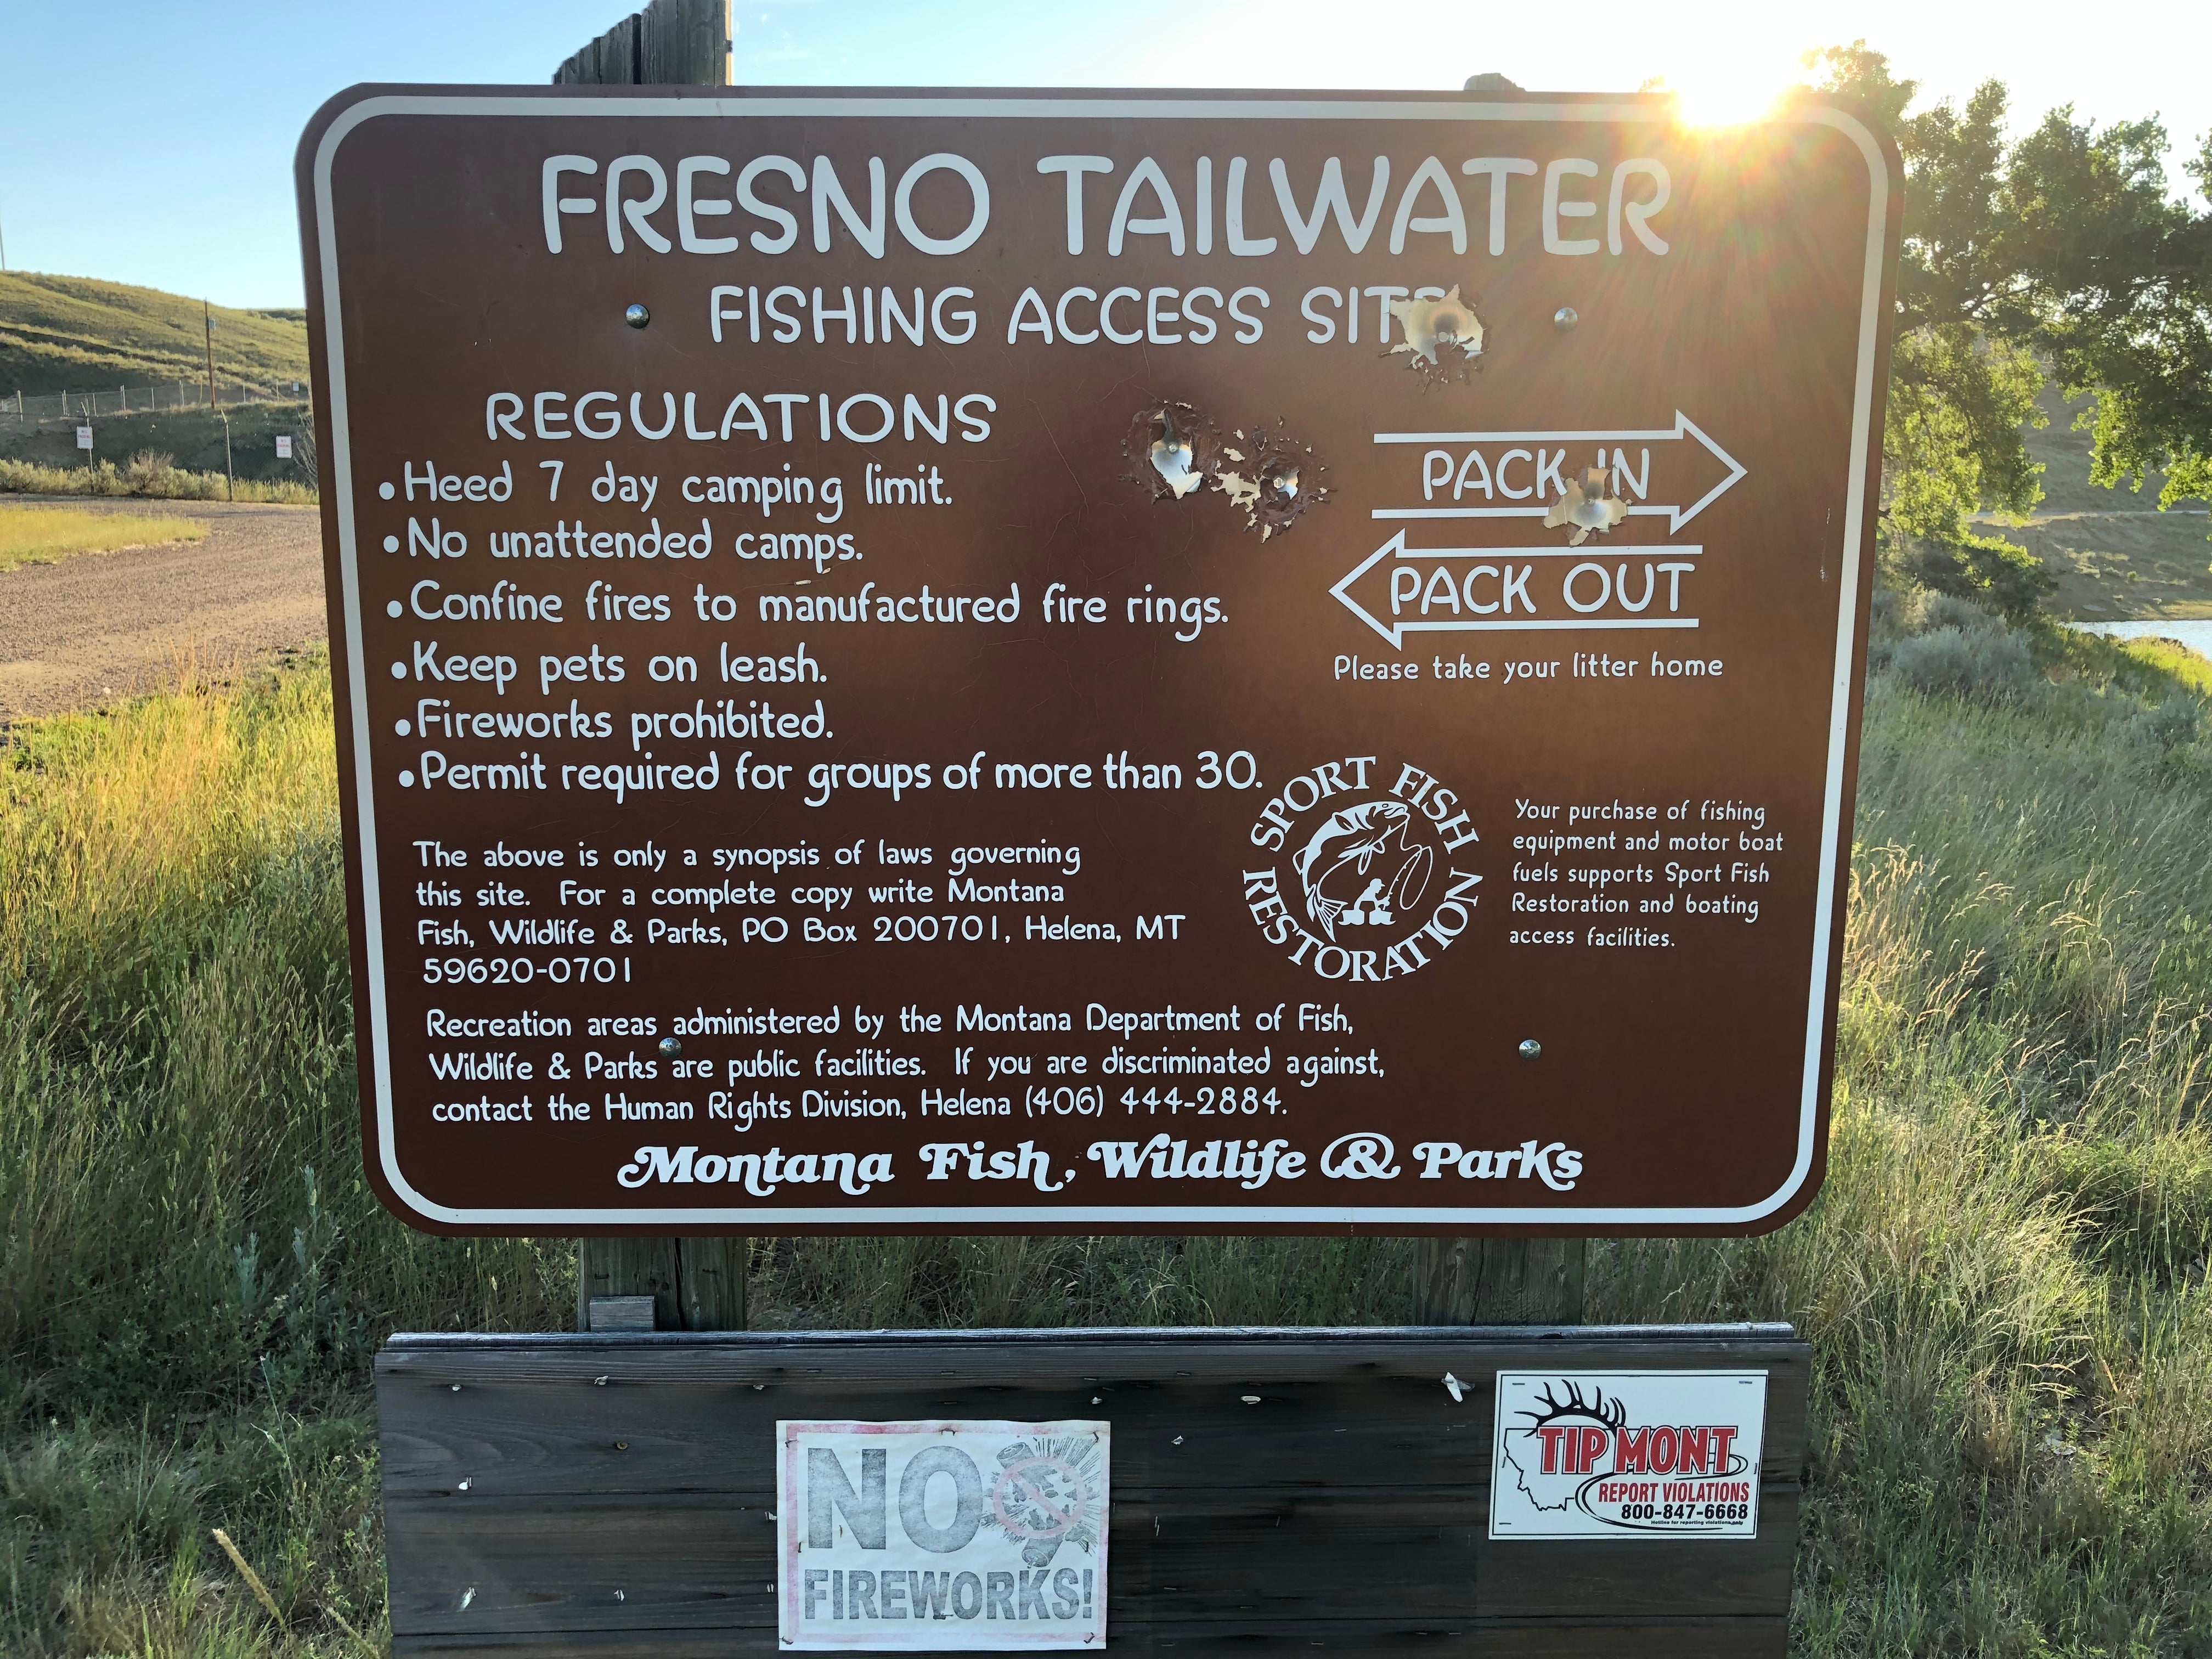 Camper submitted image from Fresno Tailwater - 4